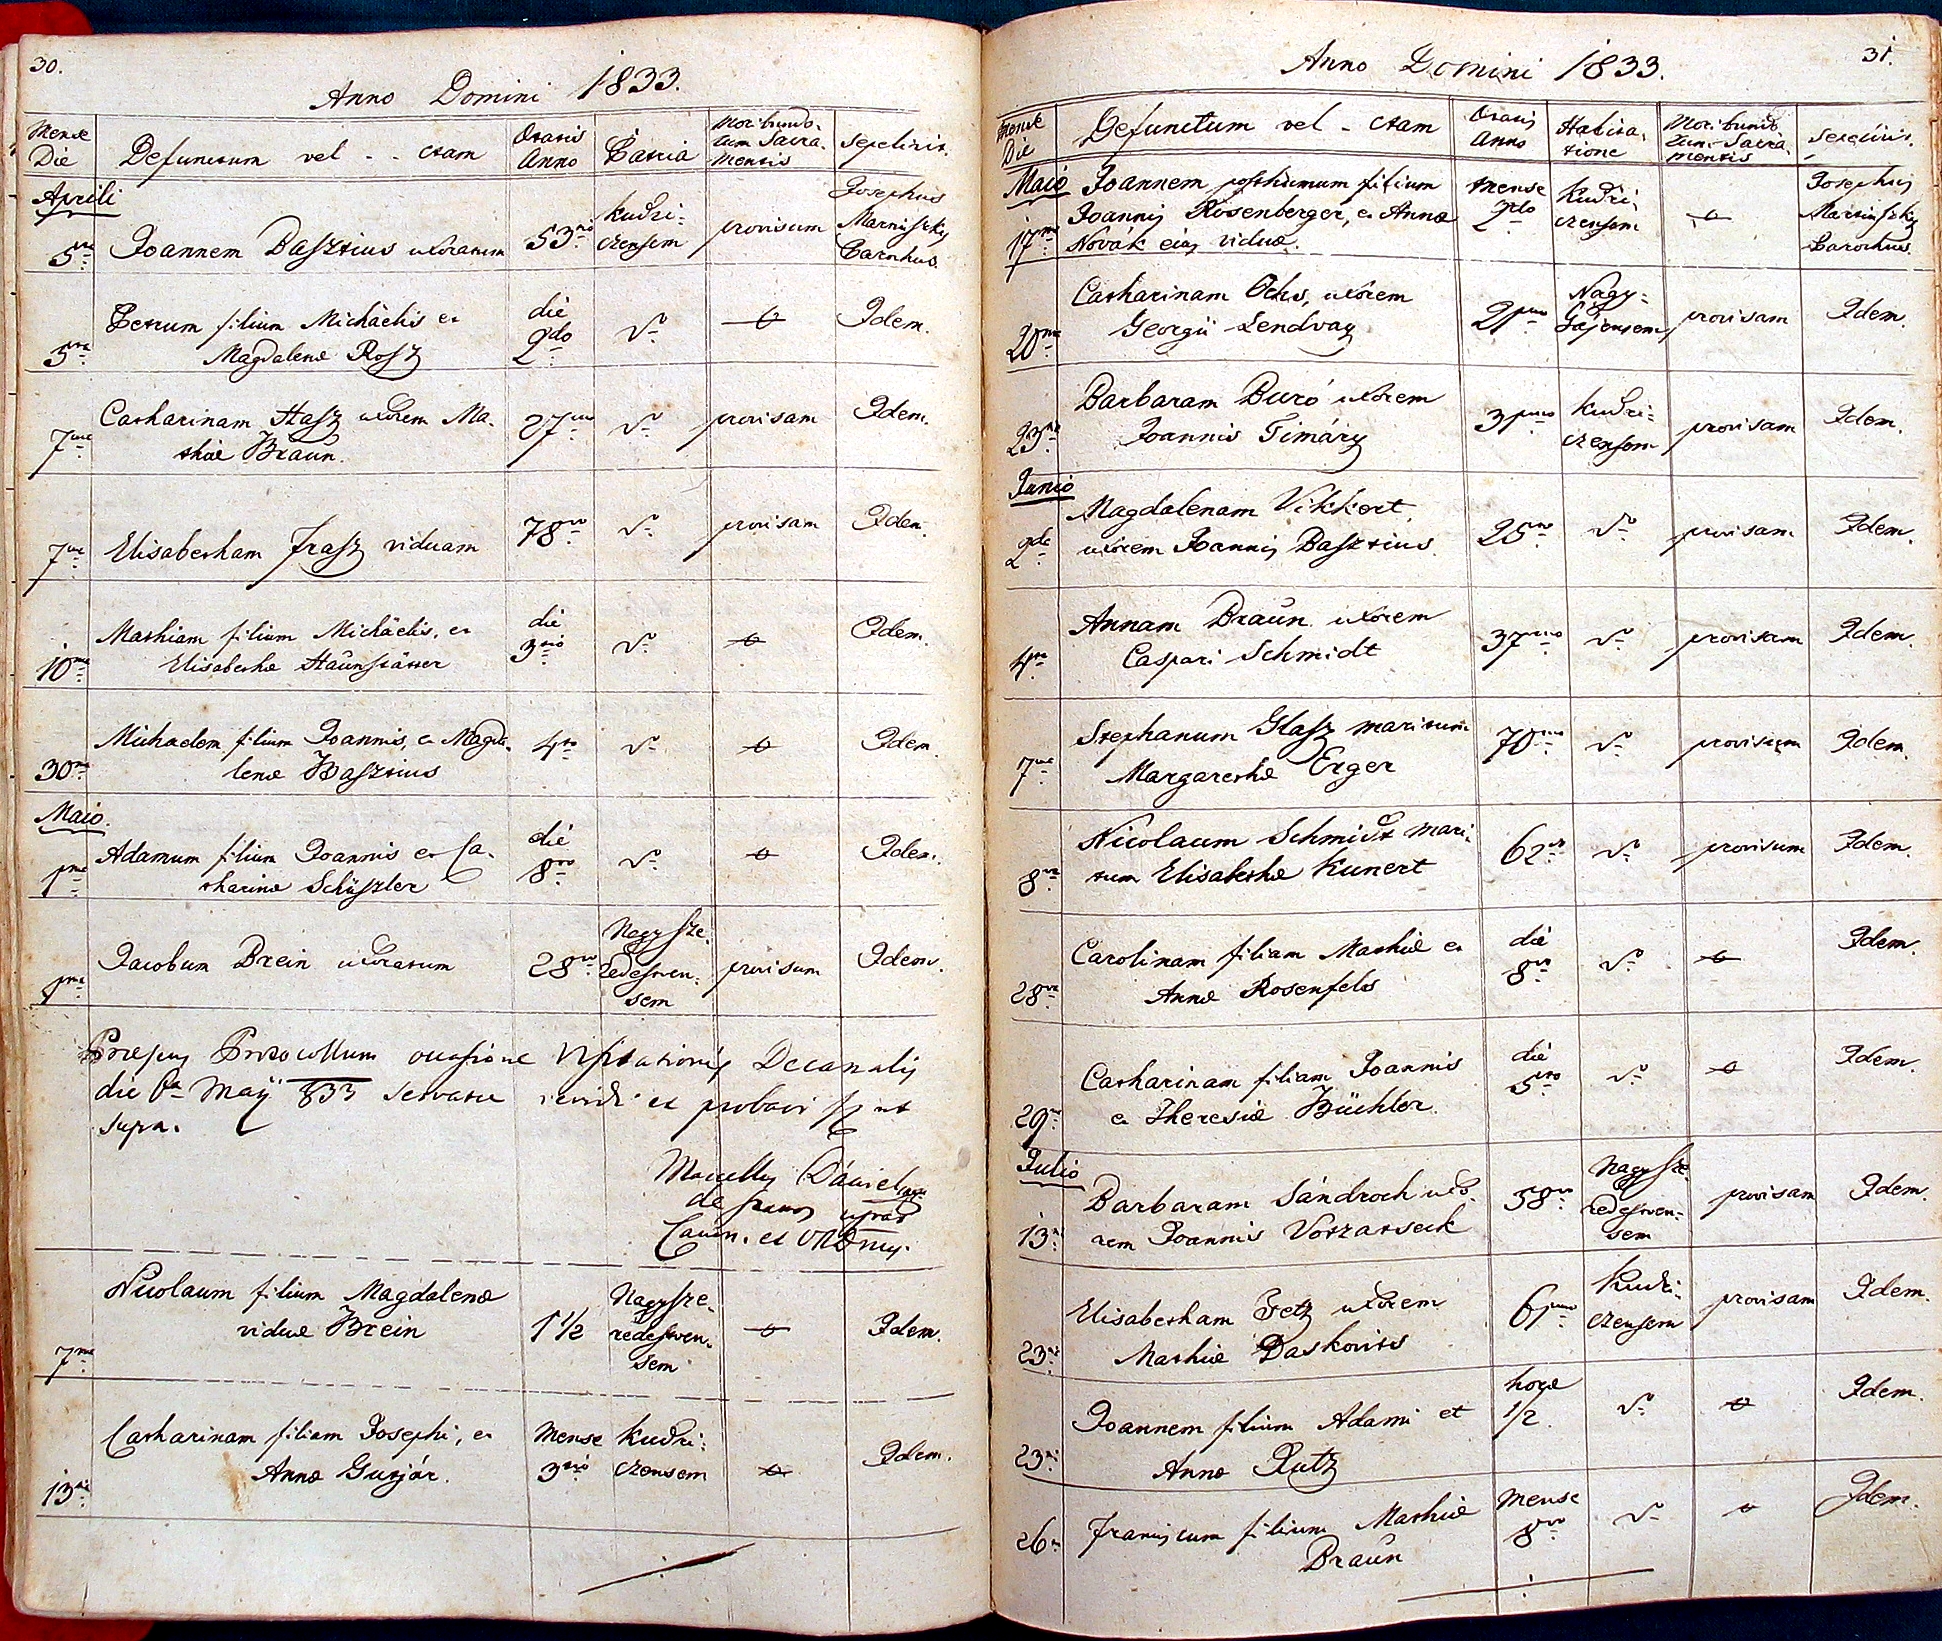 images/church_records/DEATHS/1829-1851D/030 i 031